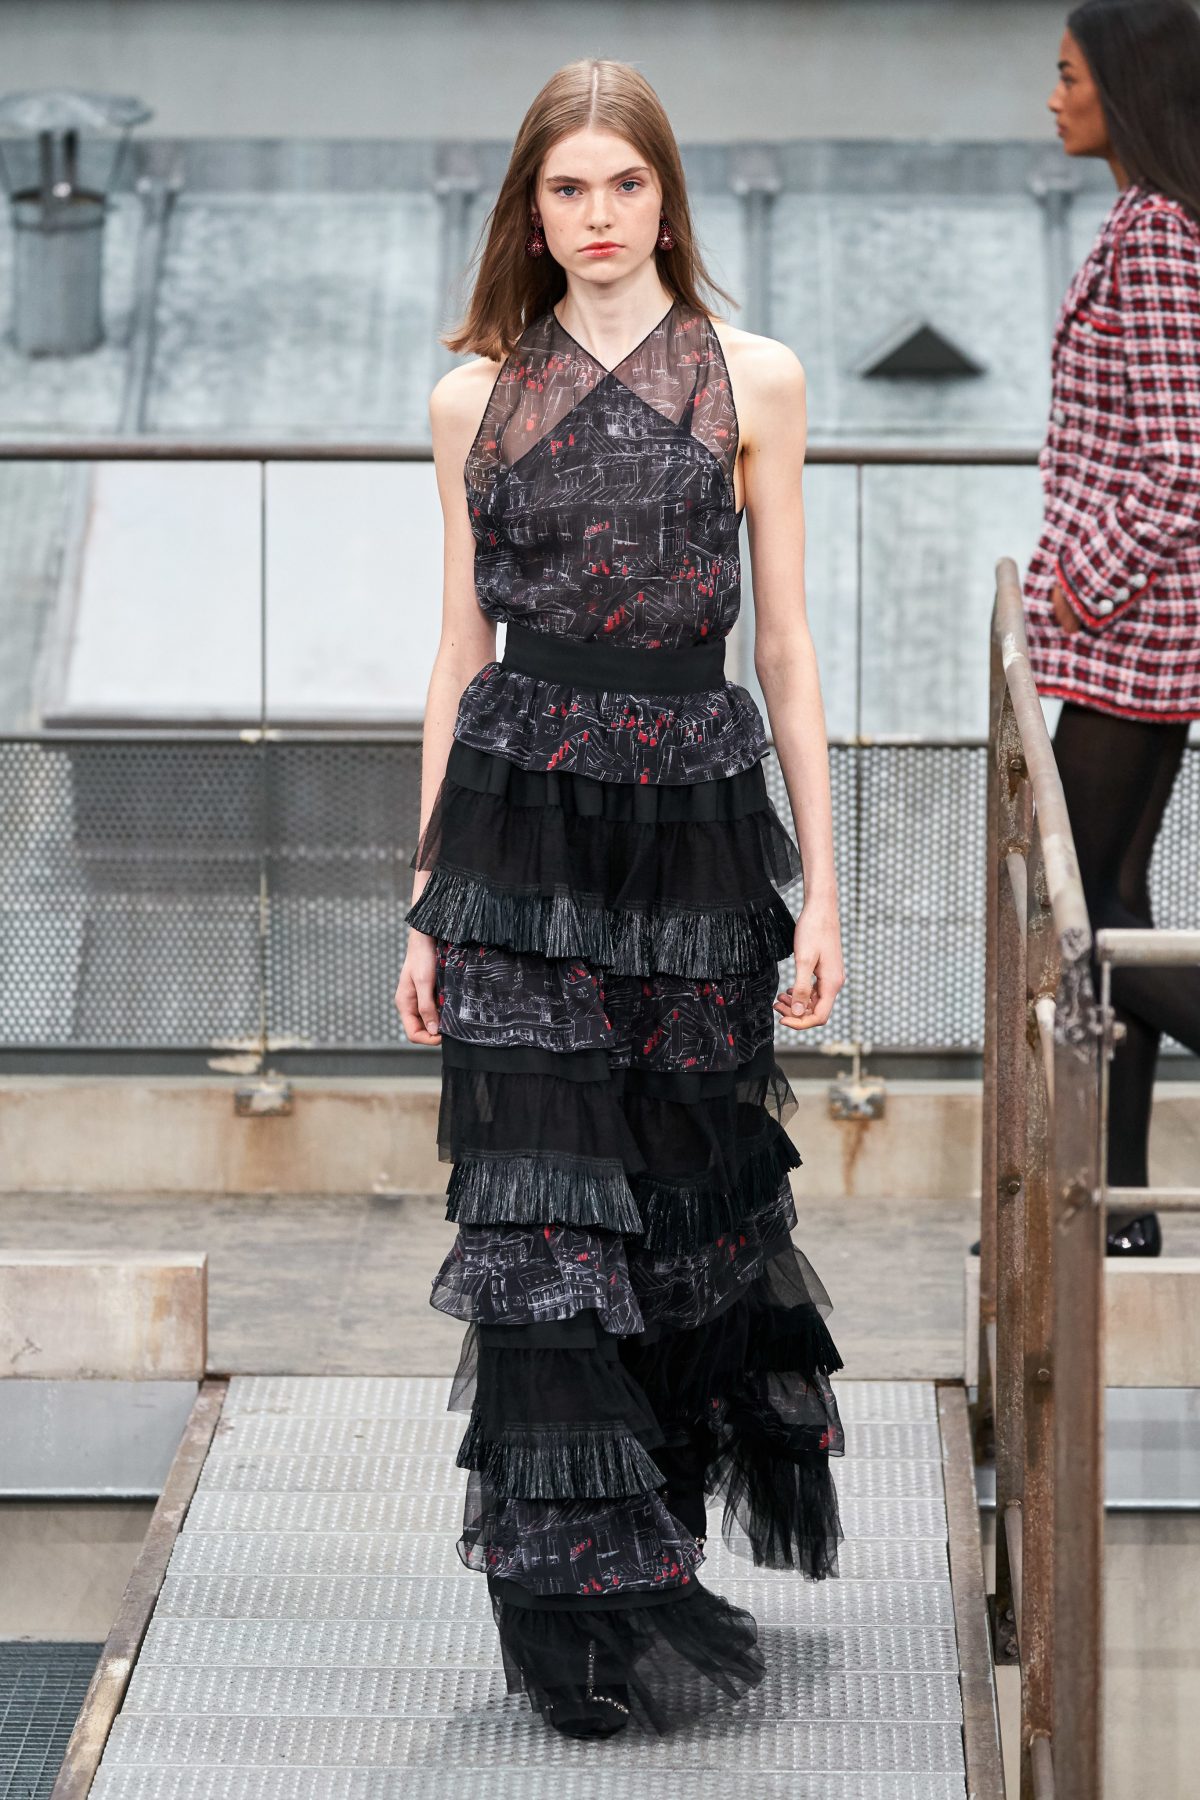 Chanel Spring 2020 Runway Pictures